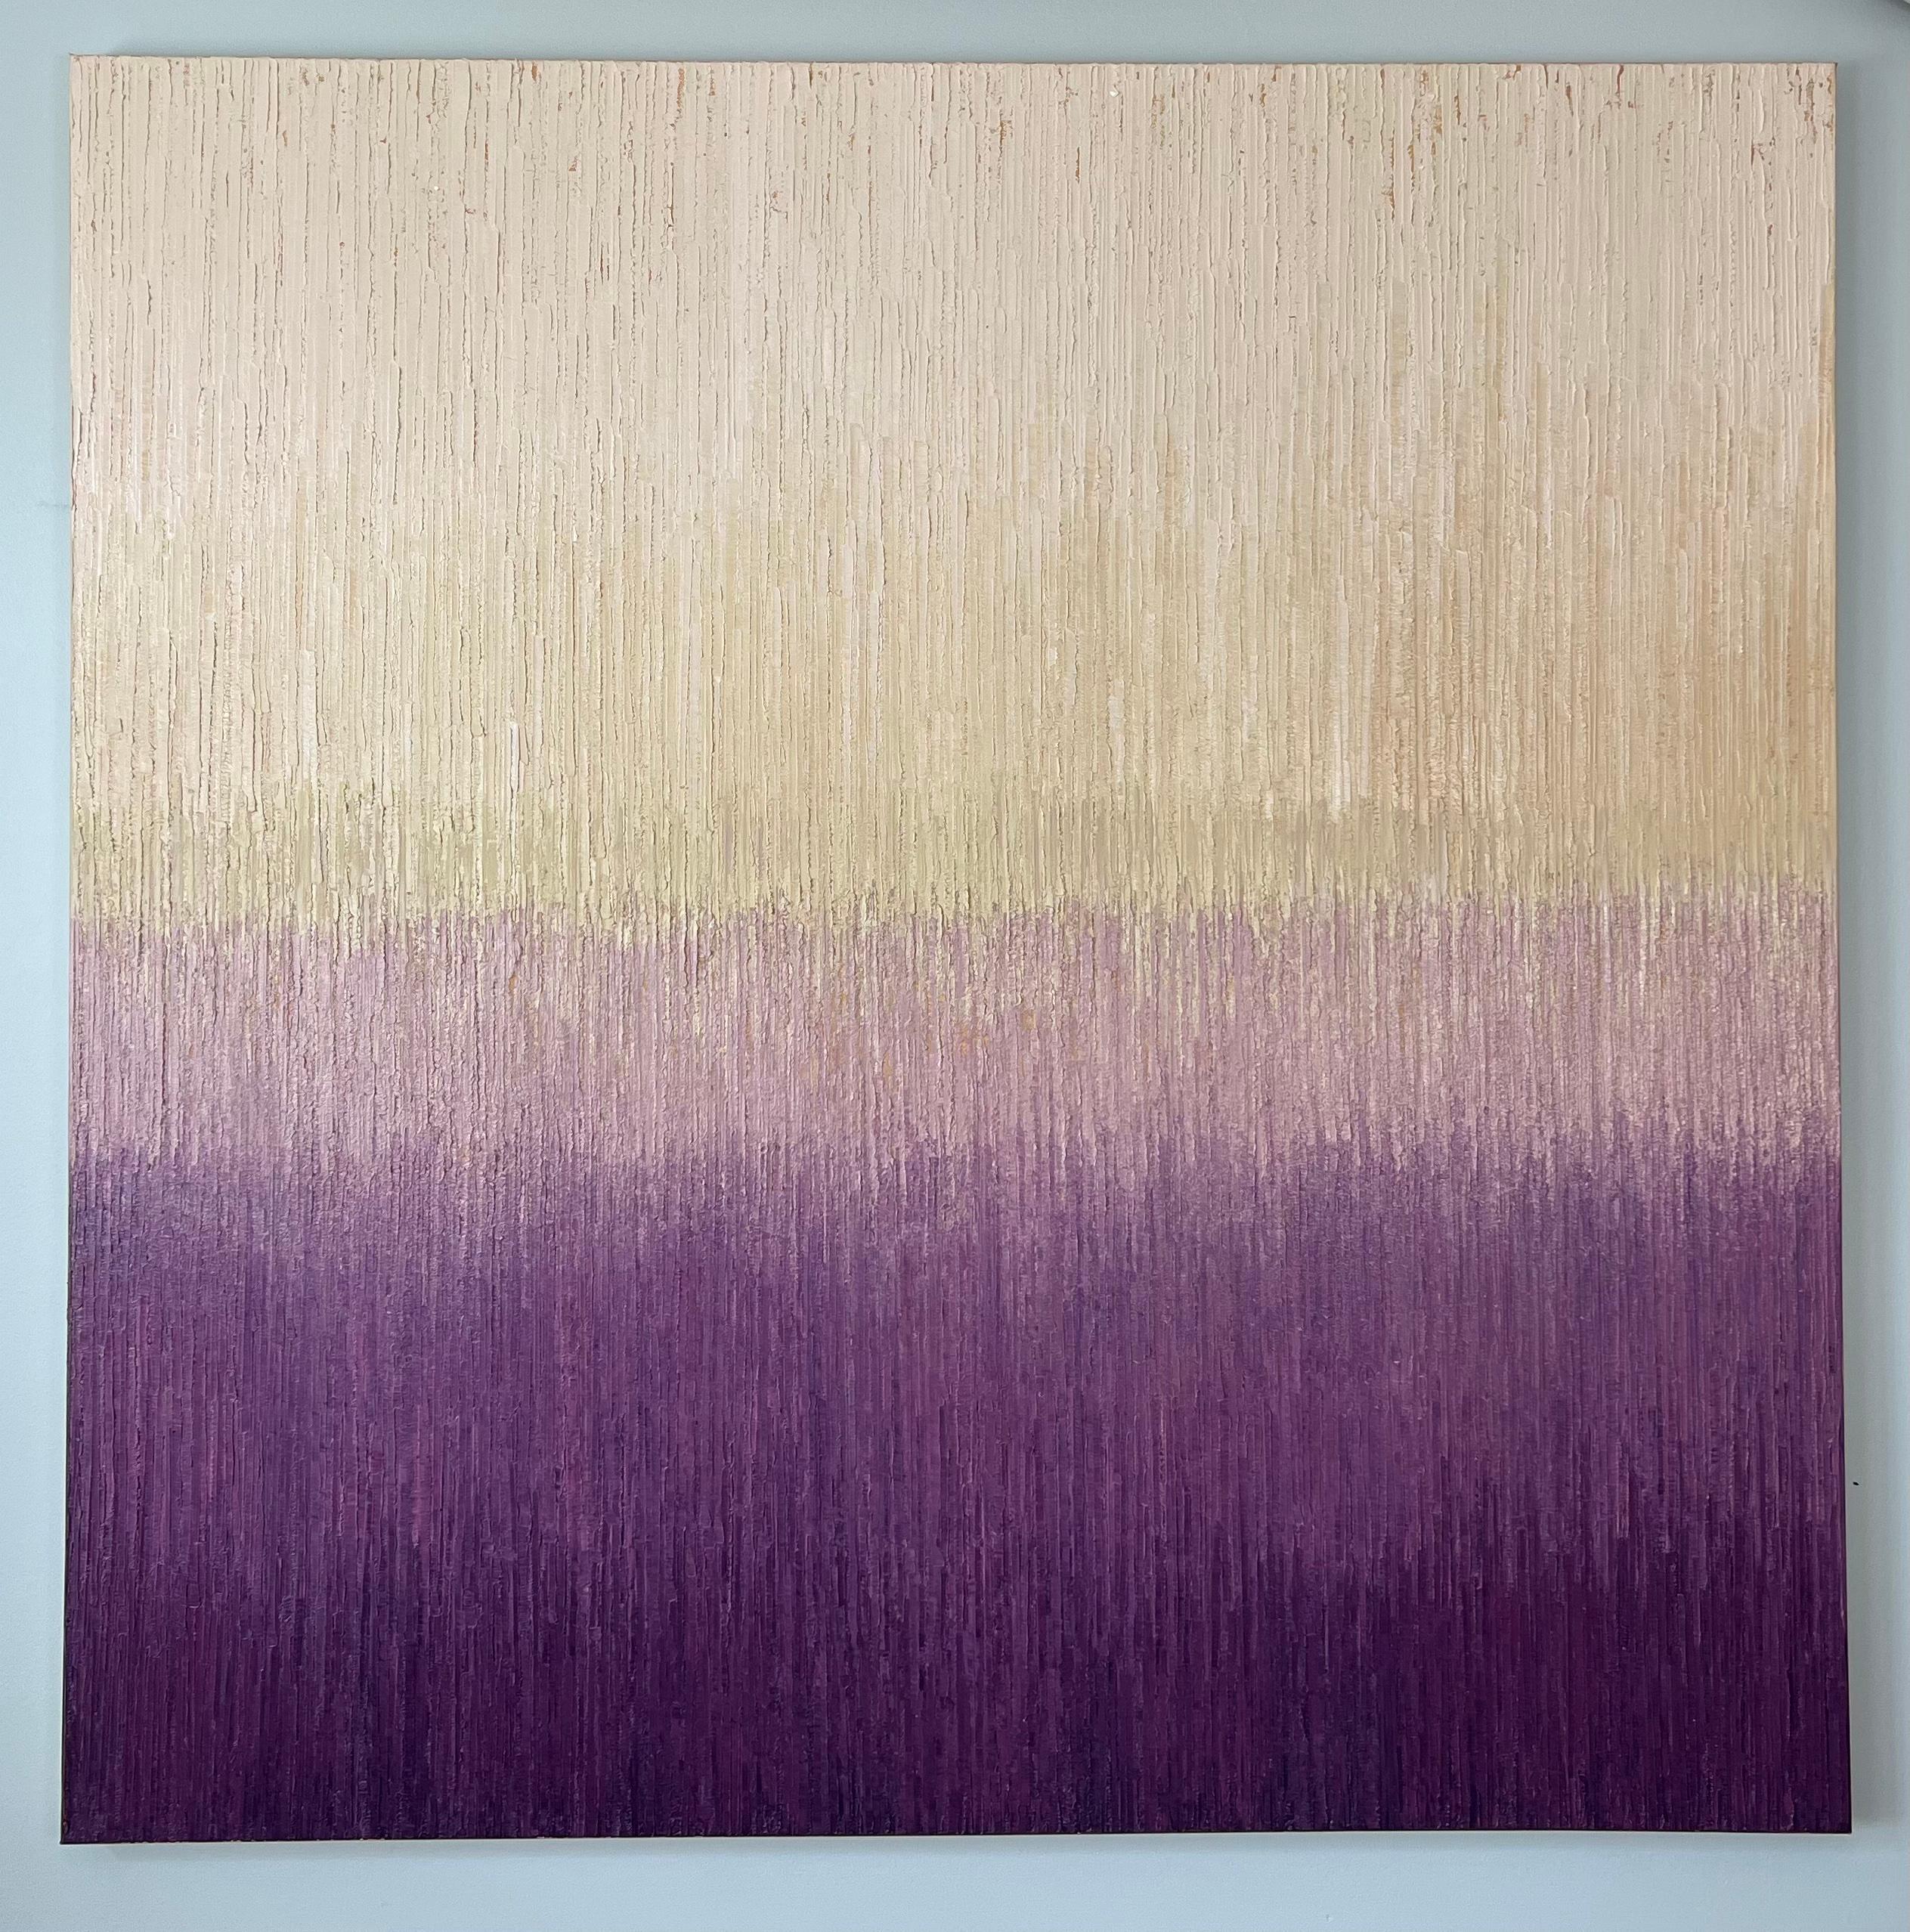 <p>Artist Comments<br>Artist Janet Hamilton portrays a contemporary abstract painting with a captivating visual impression. The composition boasts a textured surface created through thick paint application using drywall knives in repetitive, linear